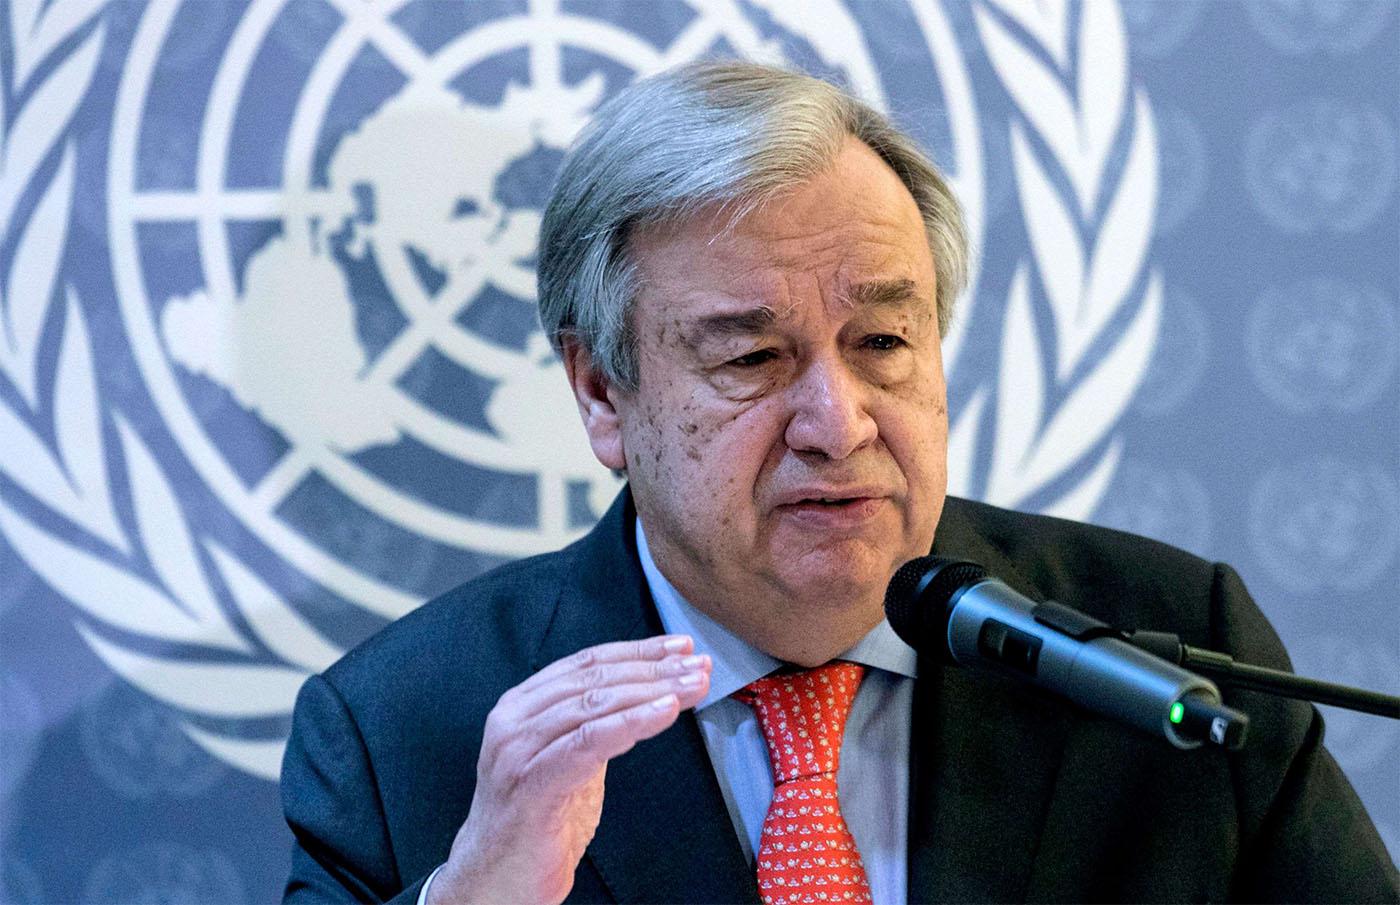 UN chief called for strict adherence to arms embargo